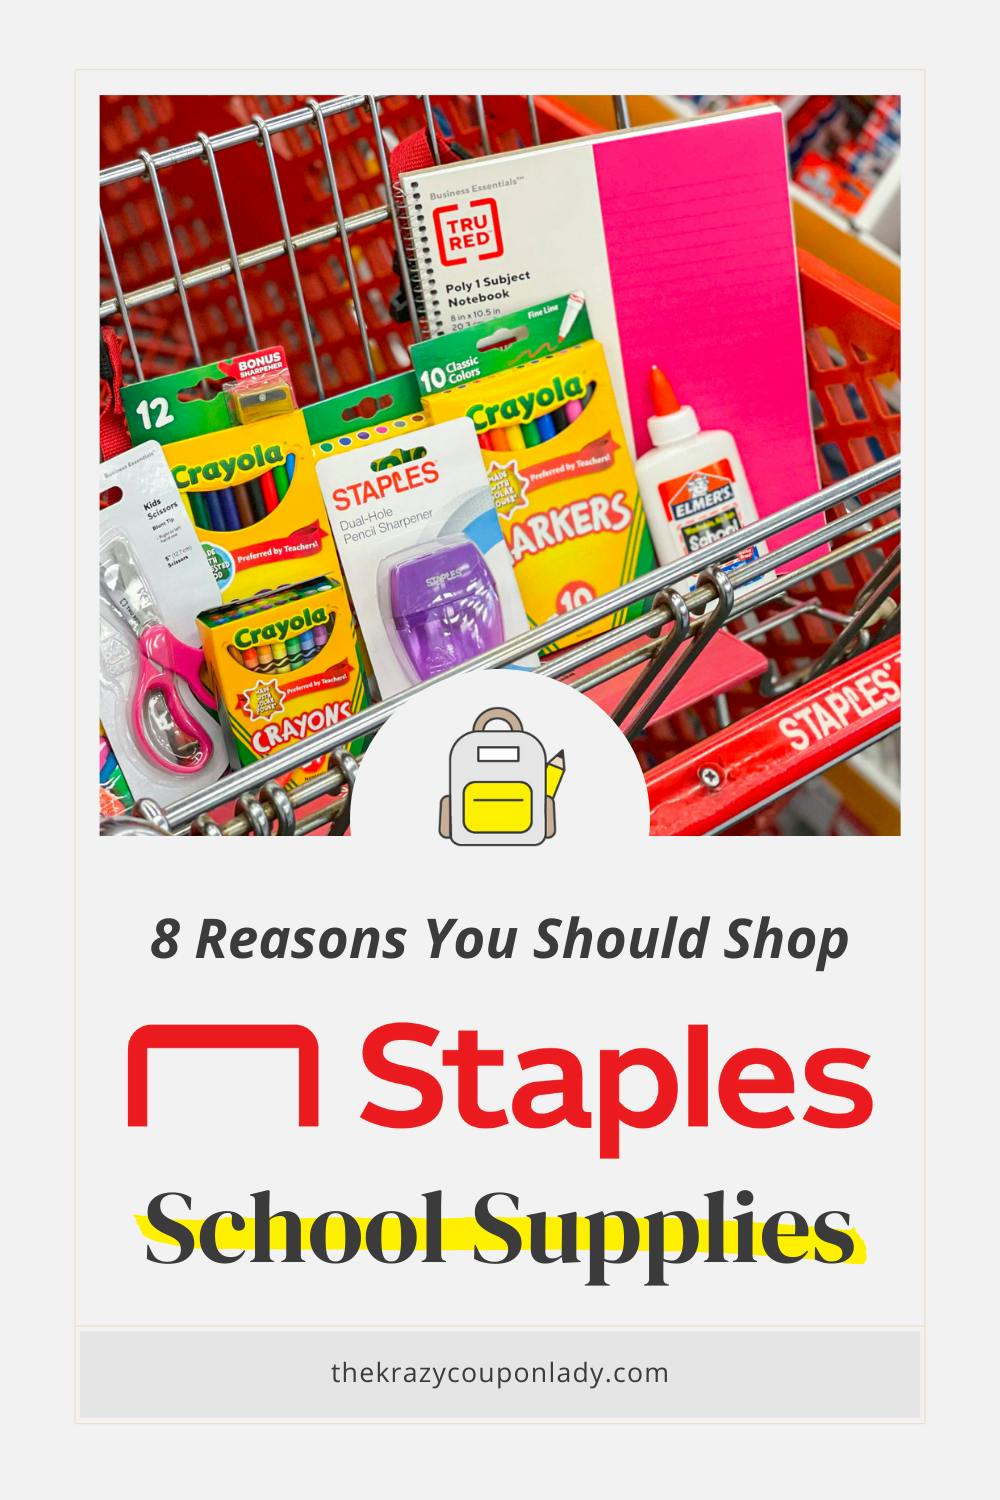 8 Reasons You Should Shop at Staples This Back-to-School Season